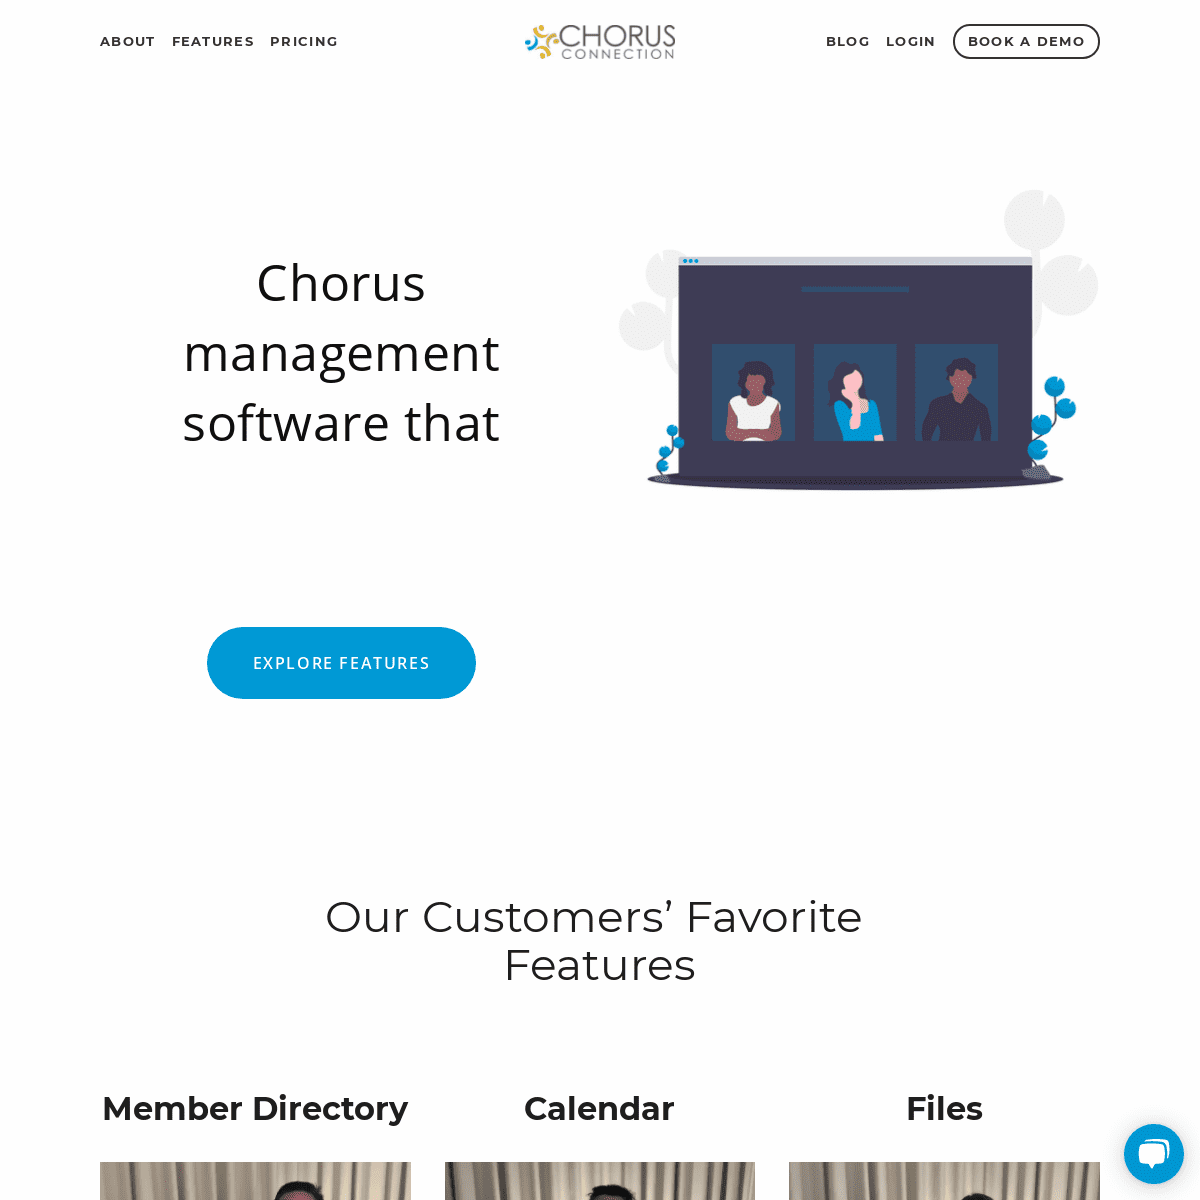 A complete backup of https://chorusconnection.com